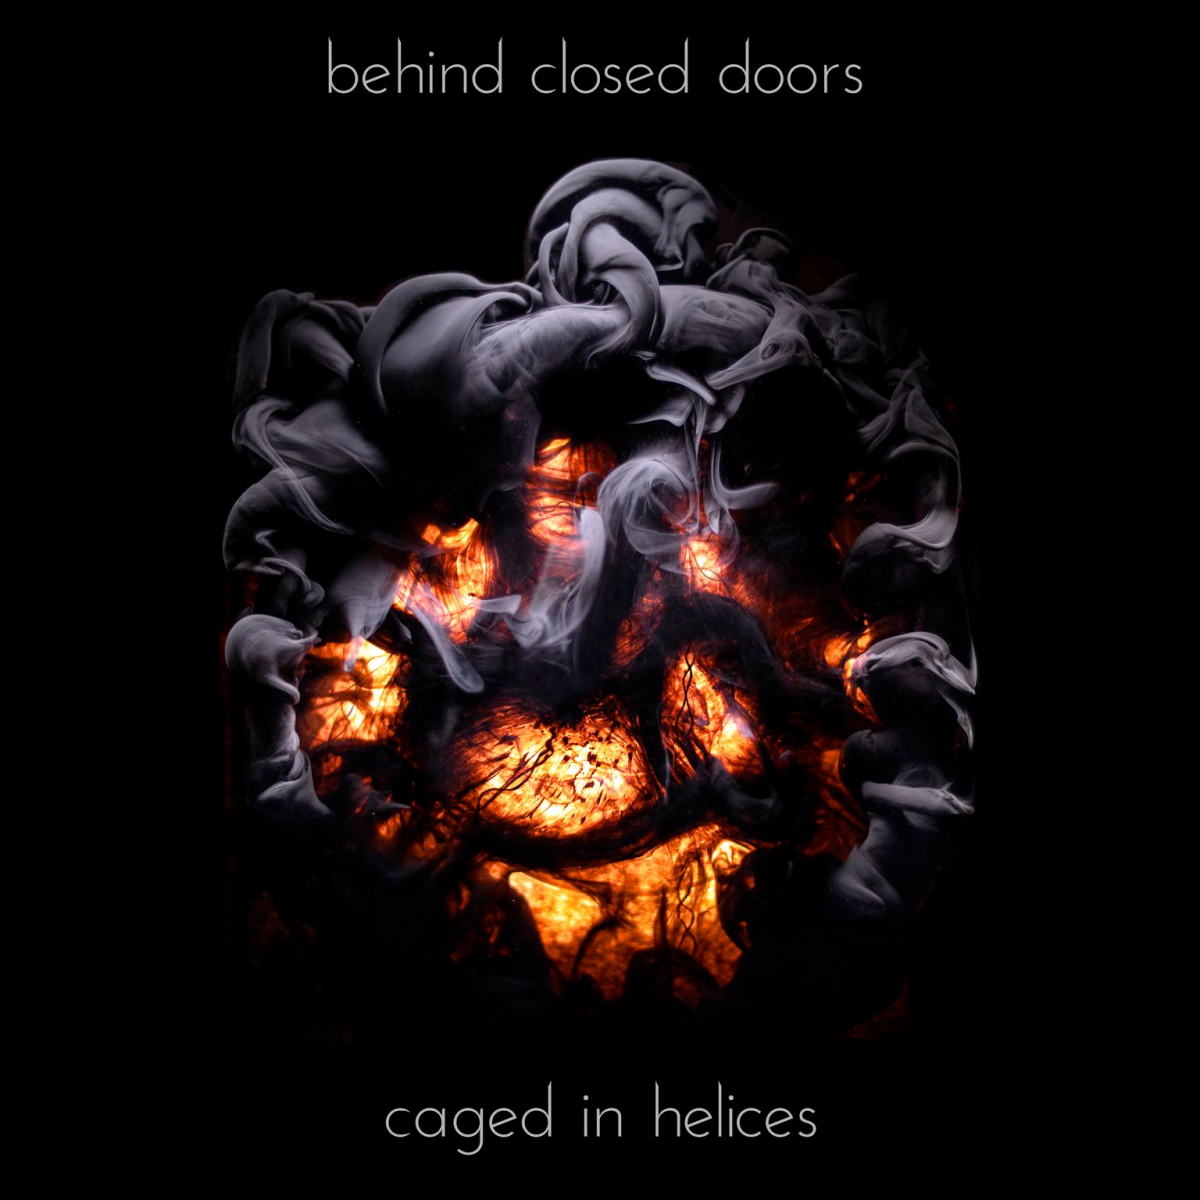 behind-closed-dorrs-caged-inhelices-album-cover